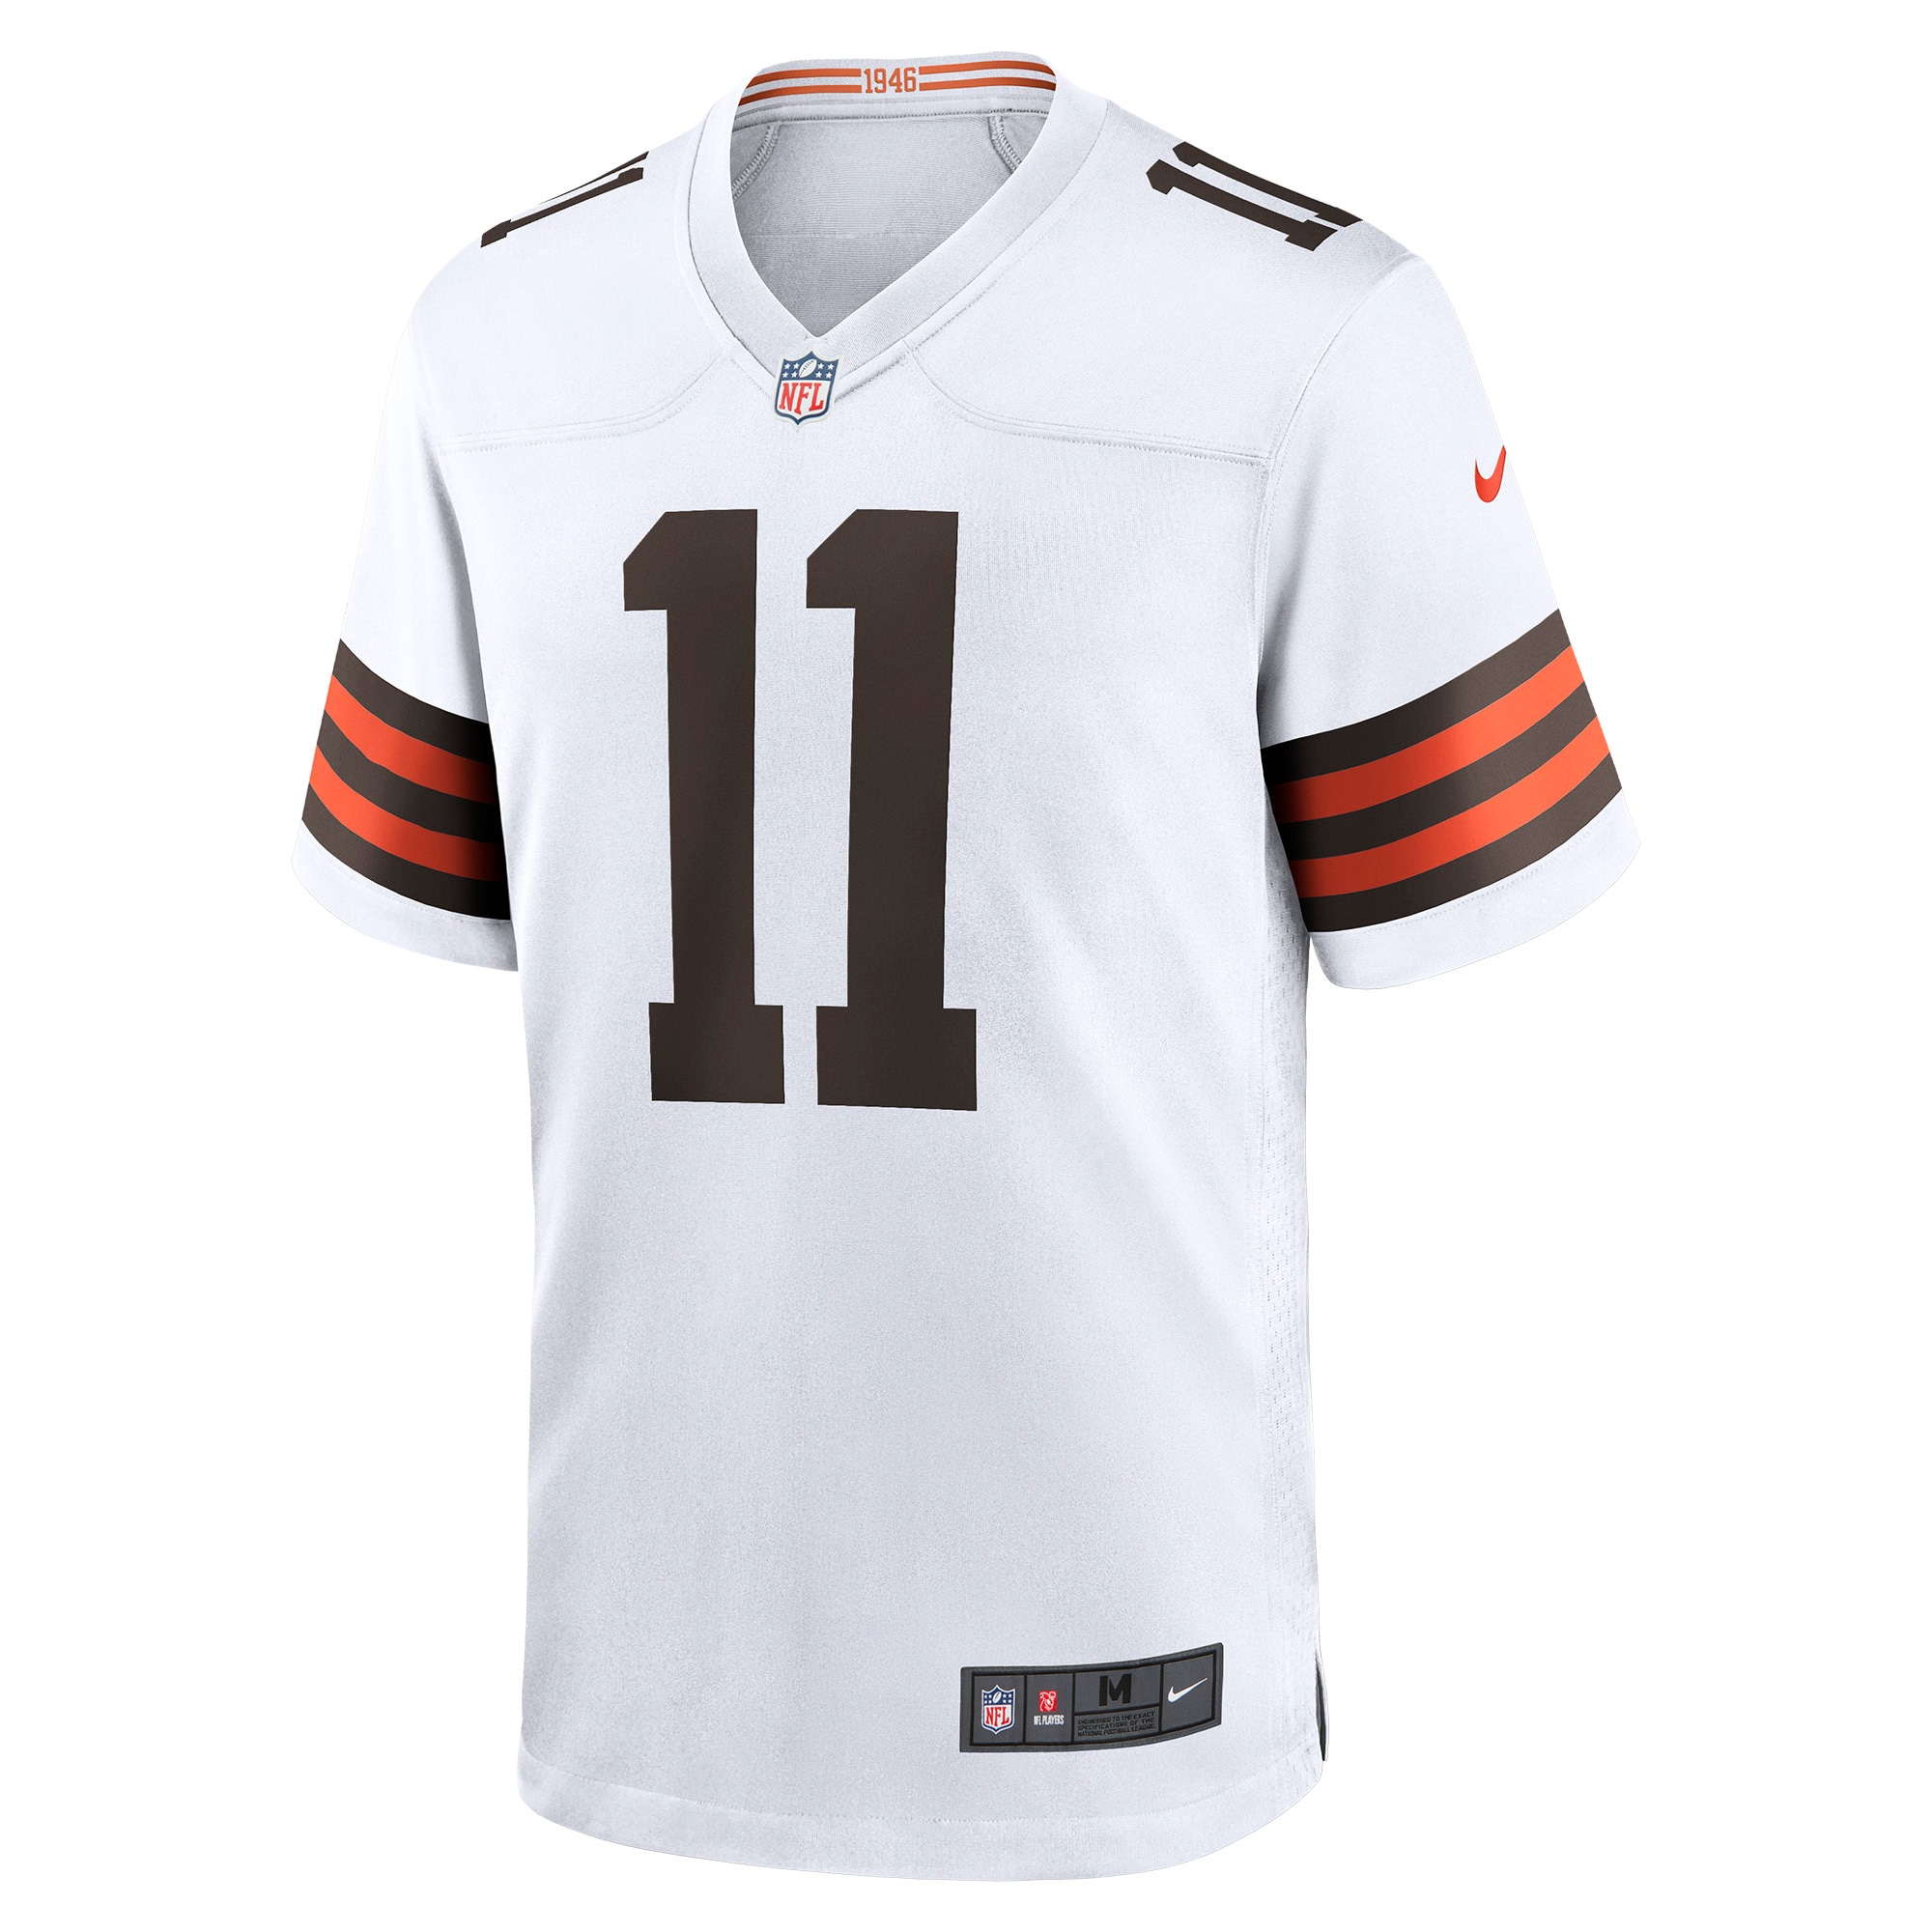 Men's Cleveland Browns Jerseys White Donovan Peoples-Jones Game Style